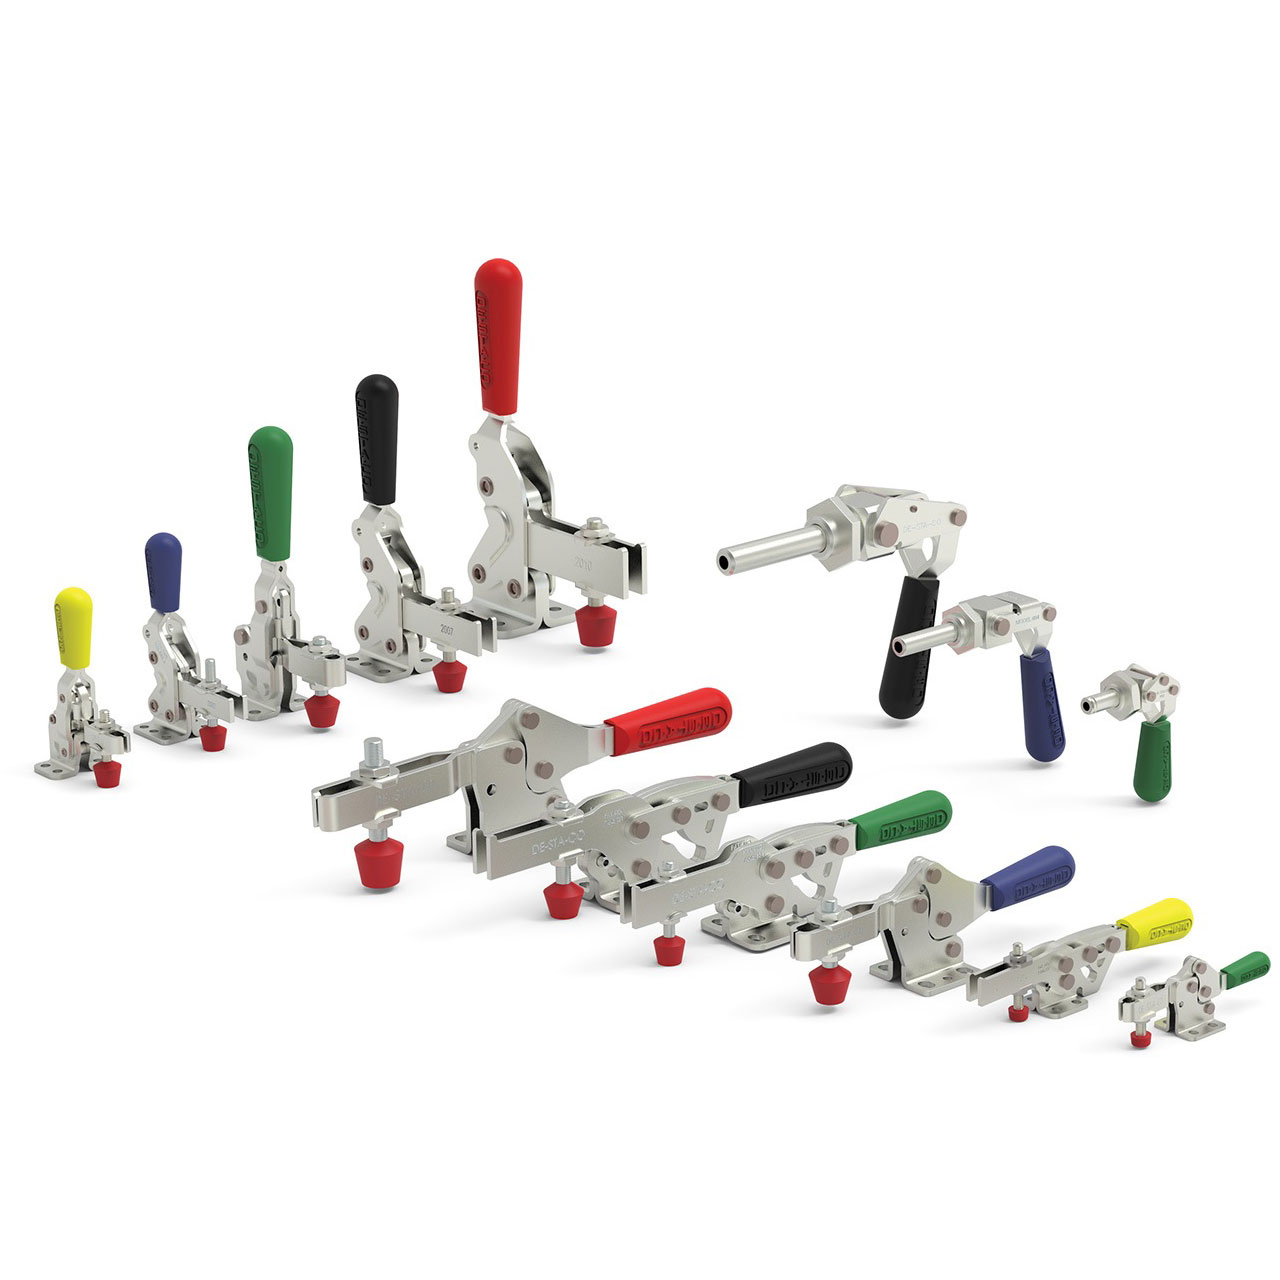 Destaco colored handles for manual clamps